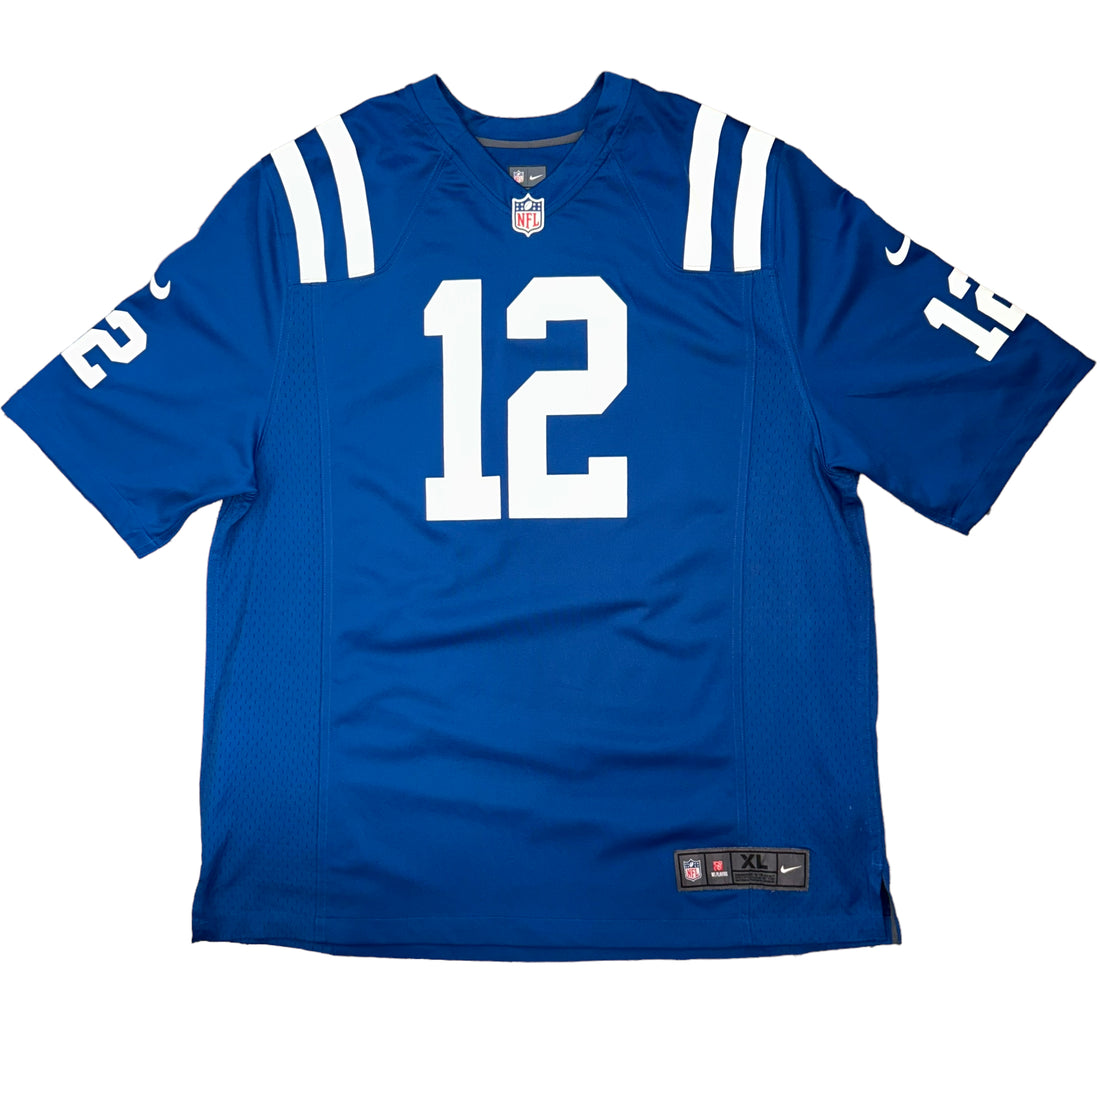 Jersey Indianopolis Colts NFL NIKE  (XL)